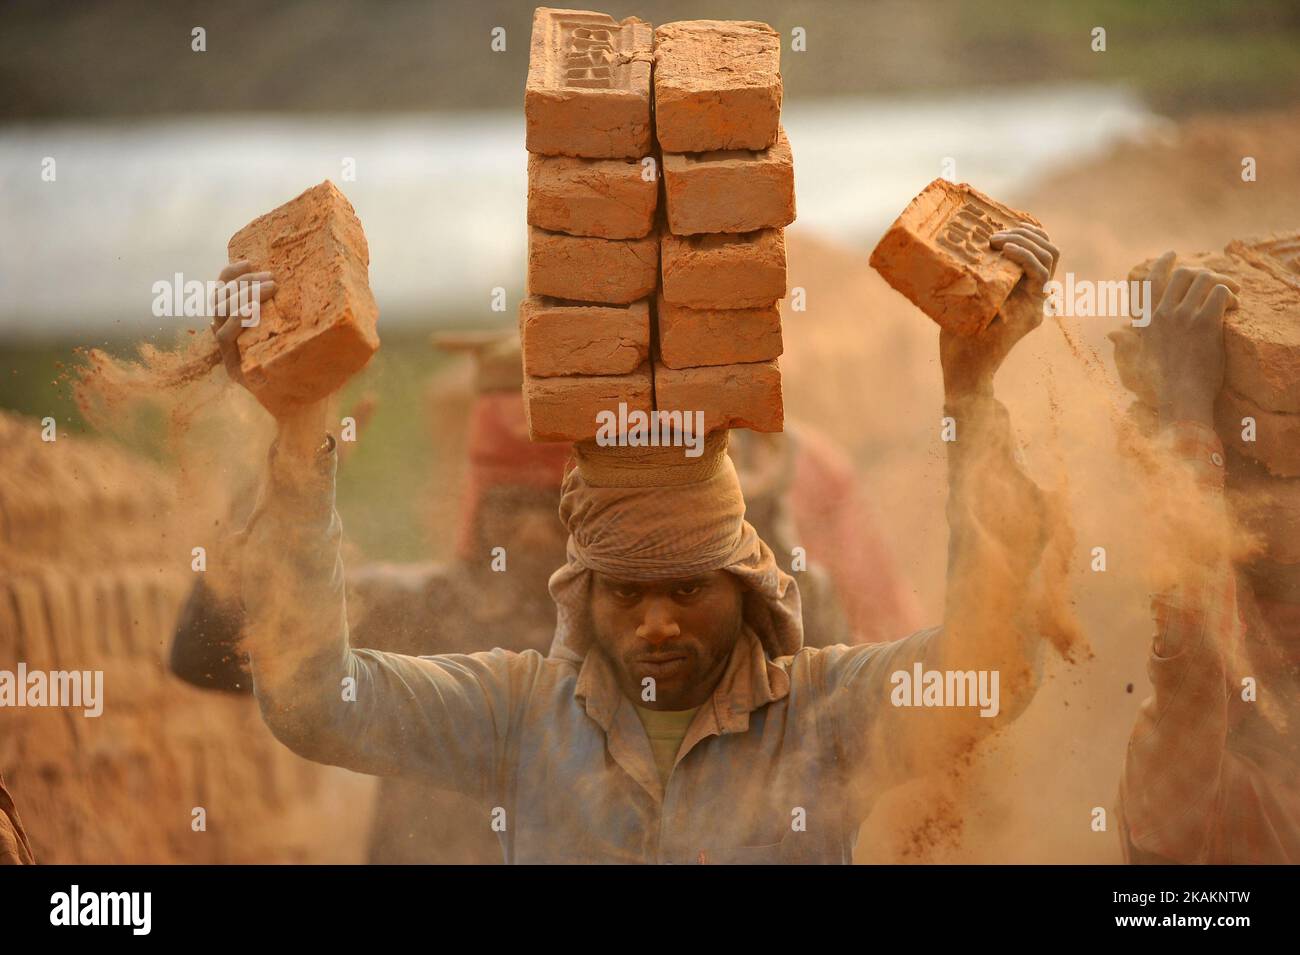 A Migrant Indian labourer stacks bricks by balancing them onto his head at a brick factory in Lalitpur, Nepal on Wednesday, February 15, 2017. Indian labourers carrys 12 to 16 bricks on his head. (Photo by Narayan Maharjan/NurPhoto) *** Please Use Credit from Credit Field *** Stock Photo